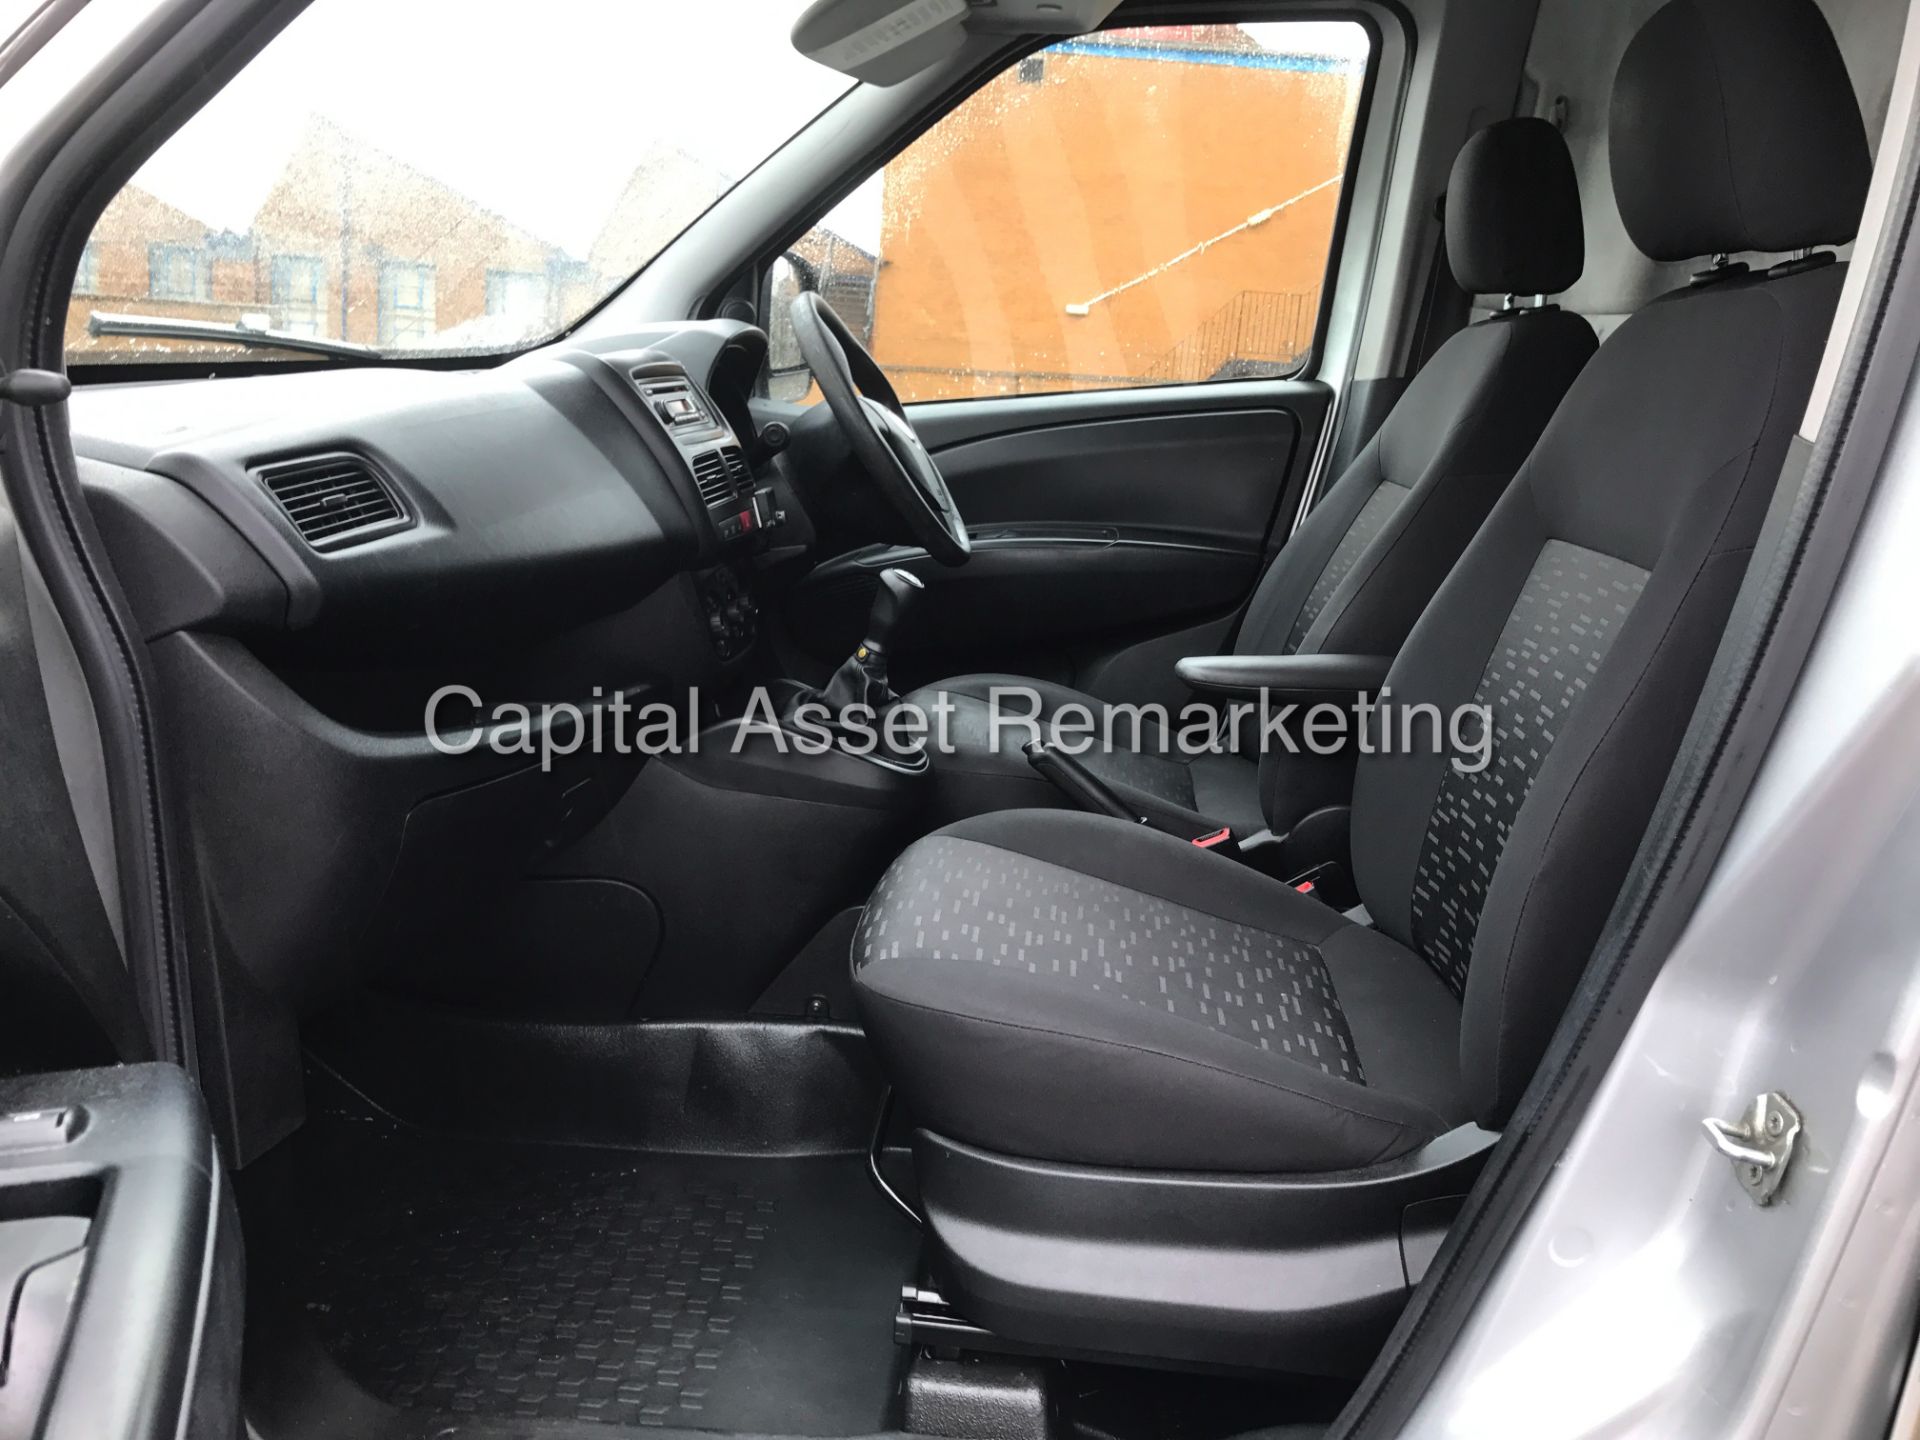 On Sale VAUXHALL COMBO 1.3CDTI "SPORTIVE - 90BHP" 1 OWNER (2013 MODEL) AIR CON - ELEC PACK - Wow!!!! - Image 12 of 15